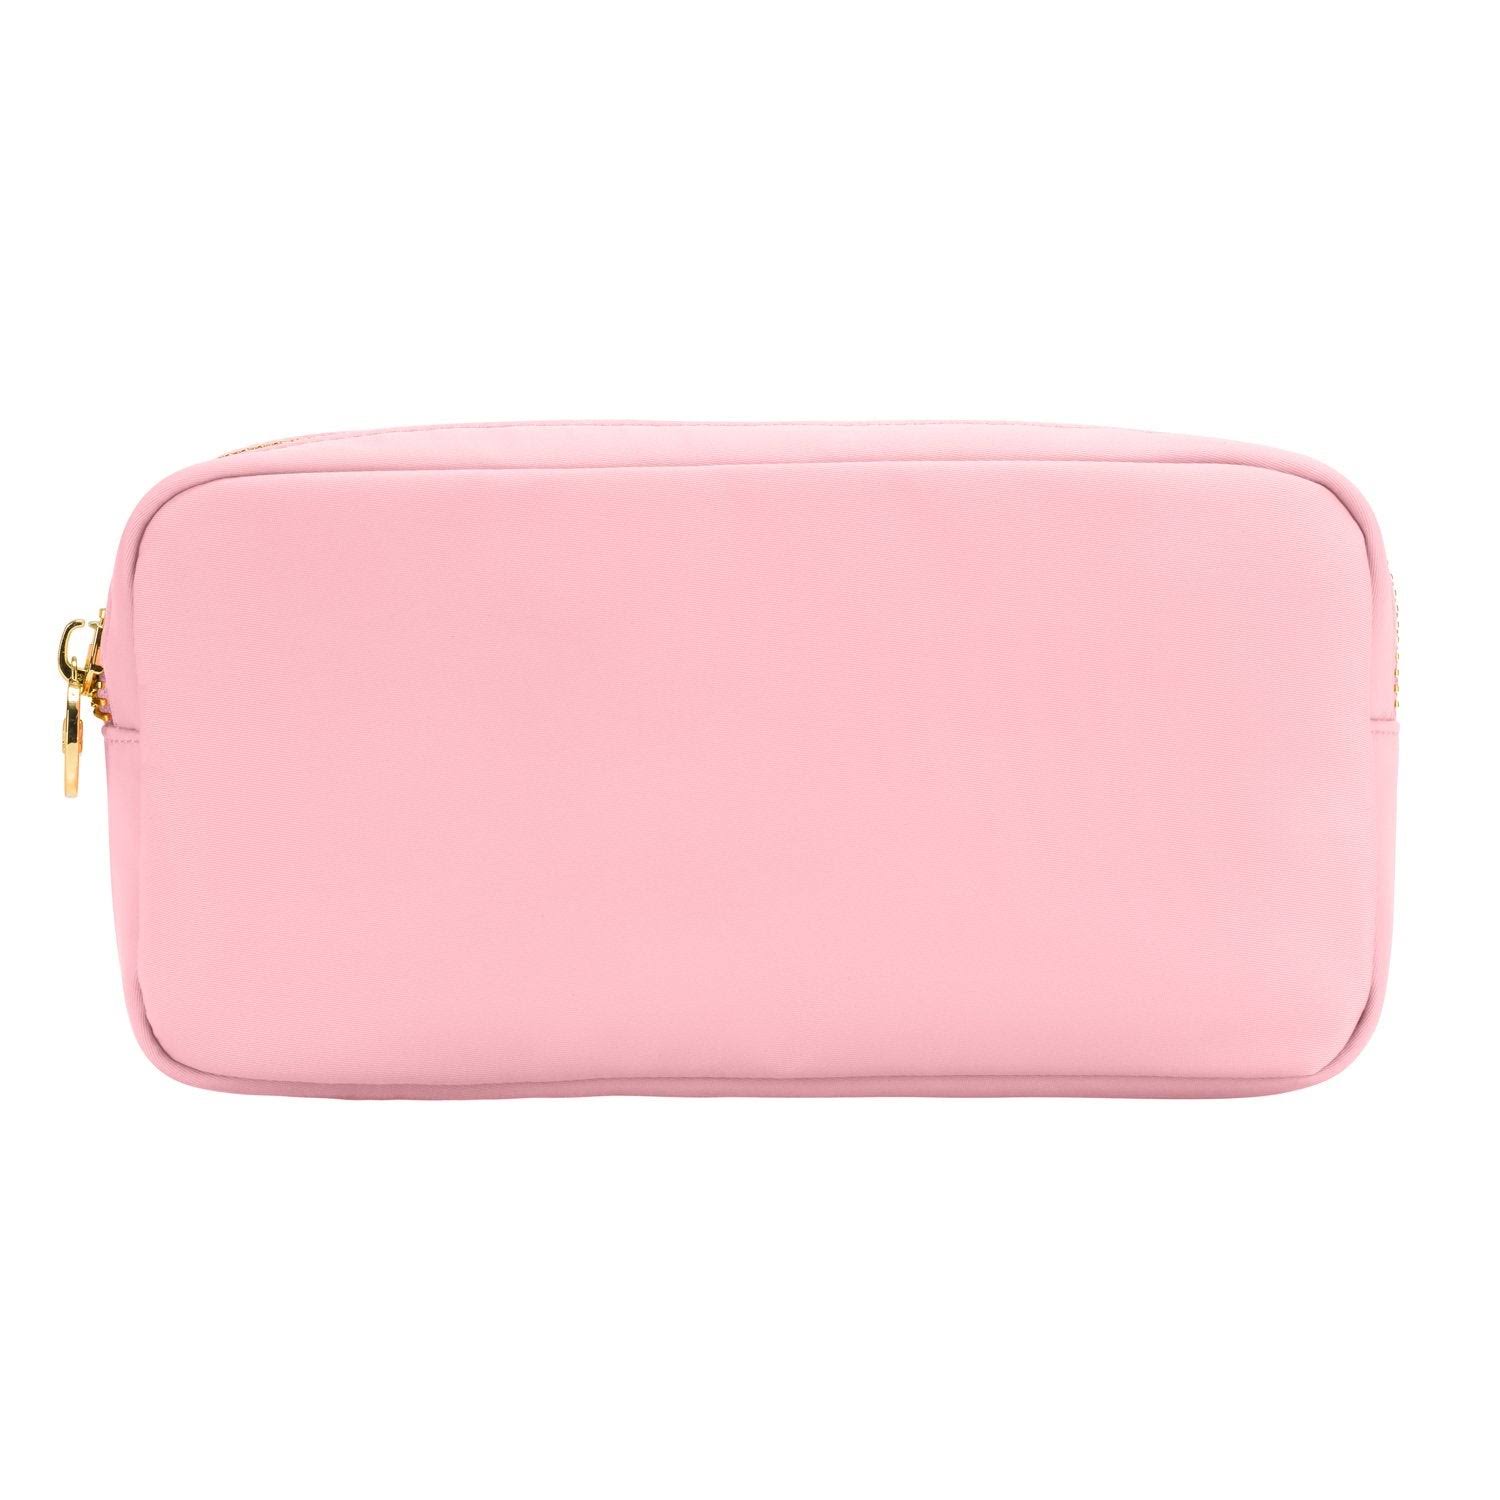 Stoney Clover Lane Classic Small Pouch in Flamingo - Pink. Size all.